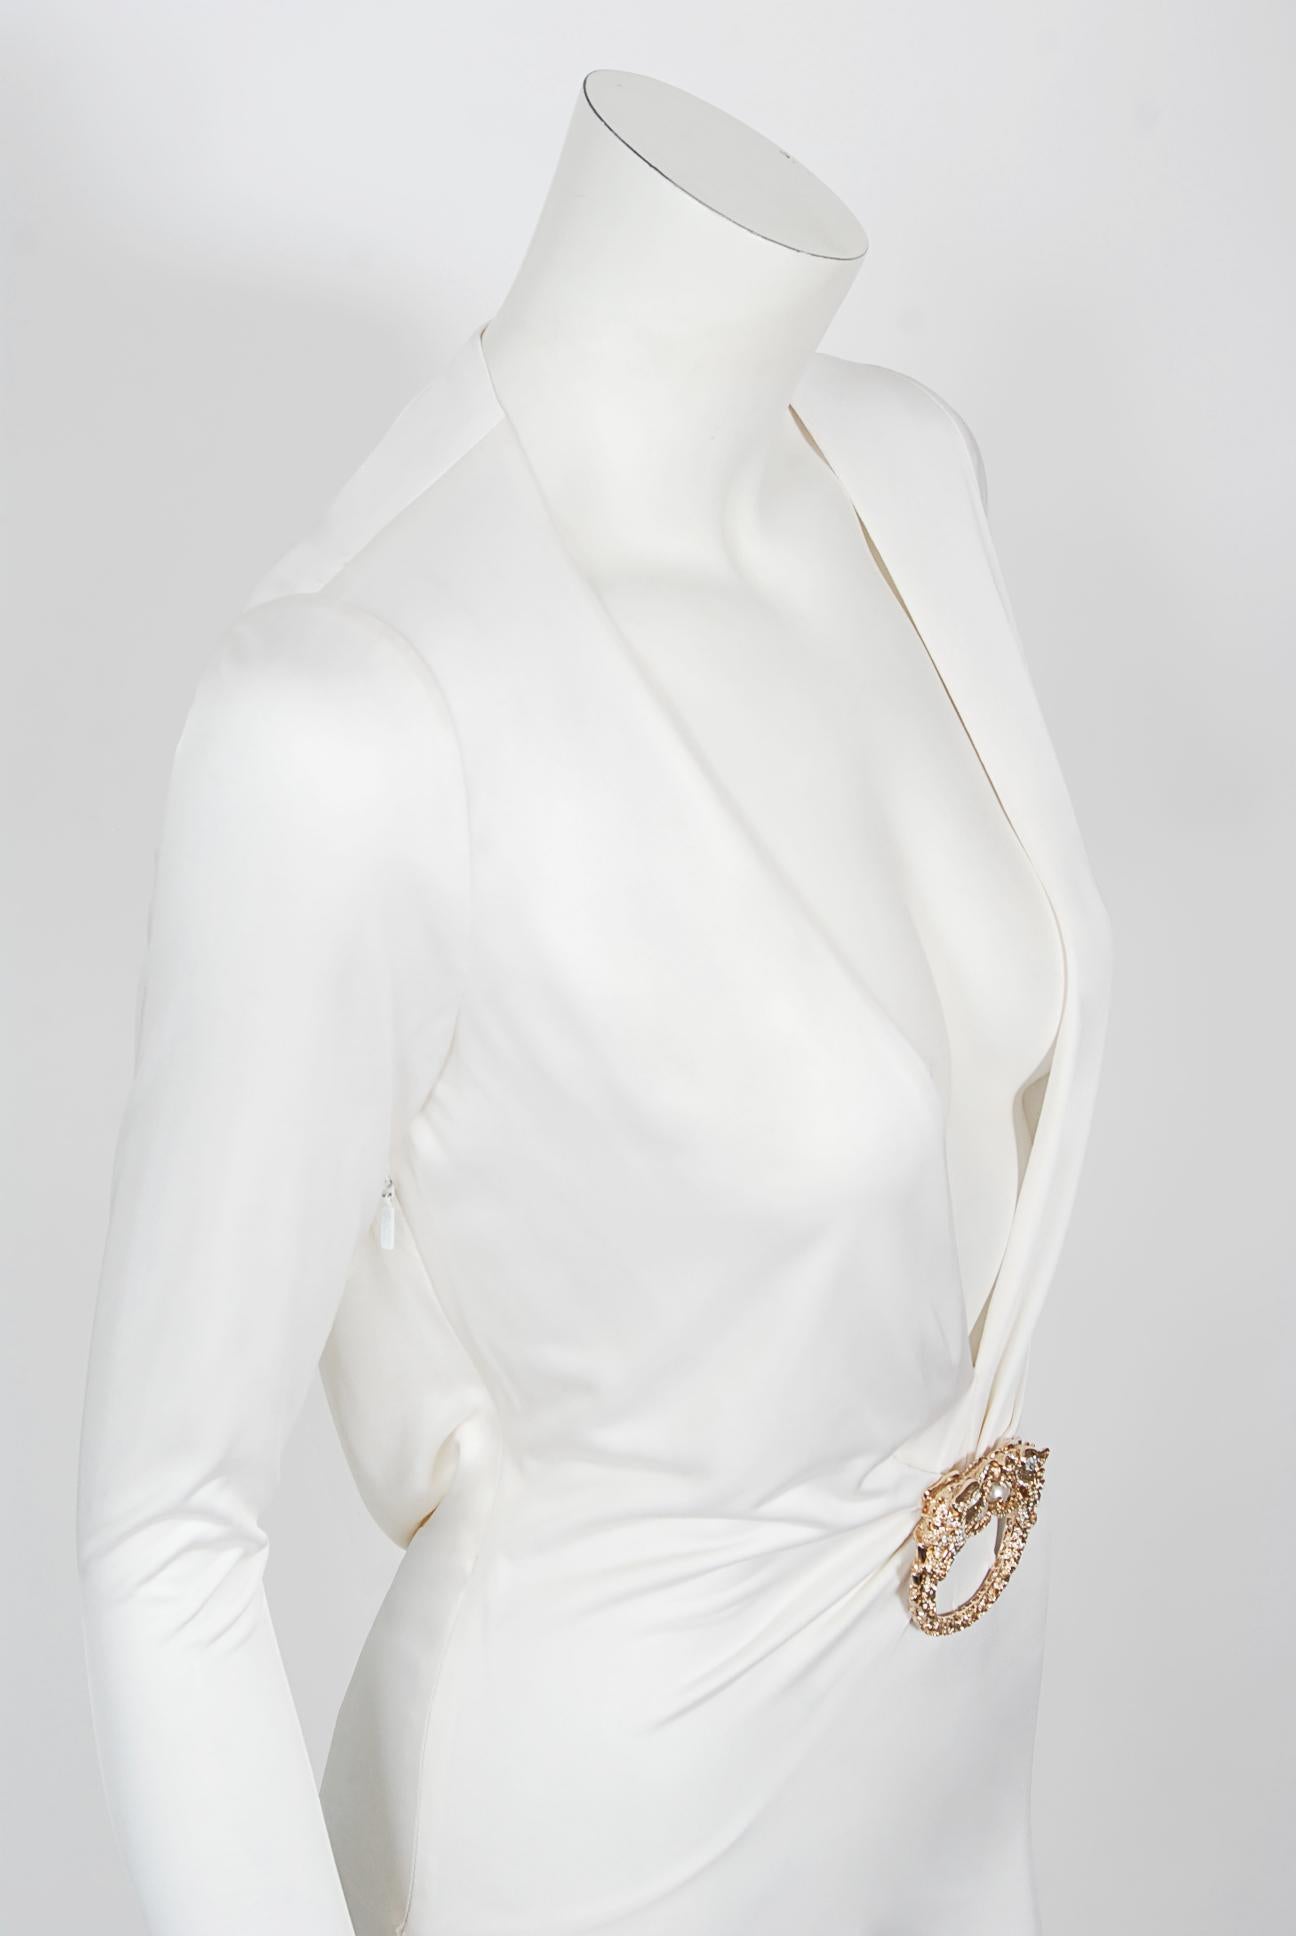 Vintage 2004 Gucci by Tom Ford Rare White Silk-Jersey Plunge Cut Out Finale Gown 8